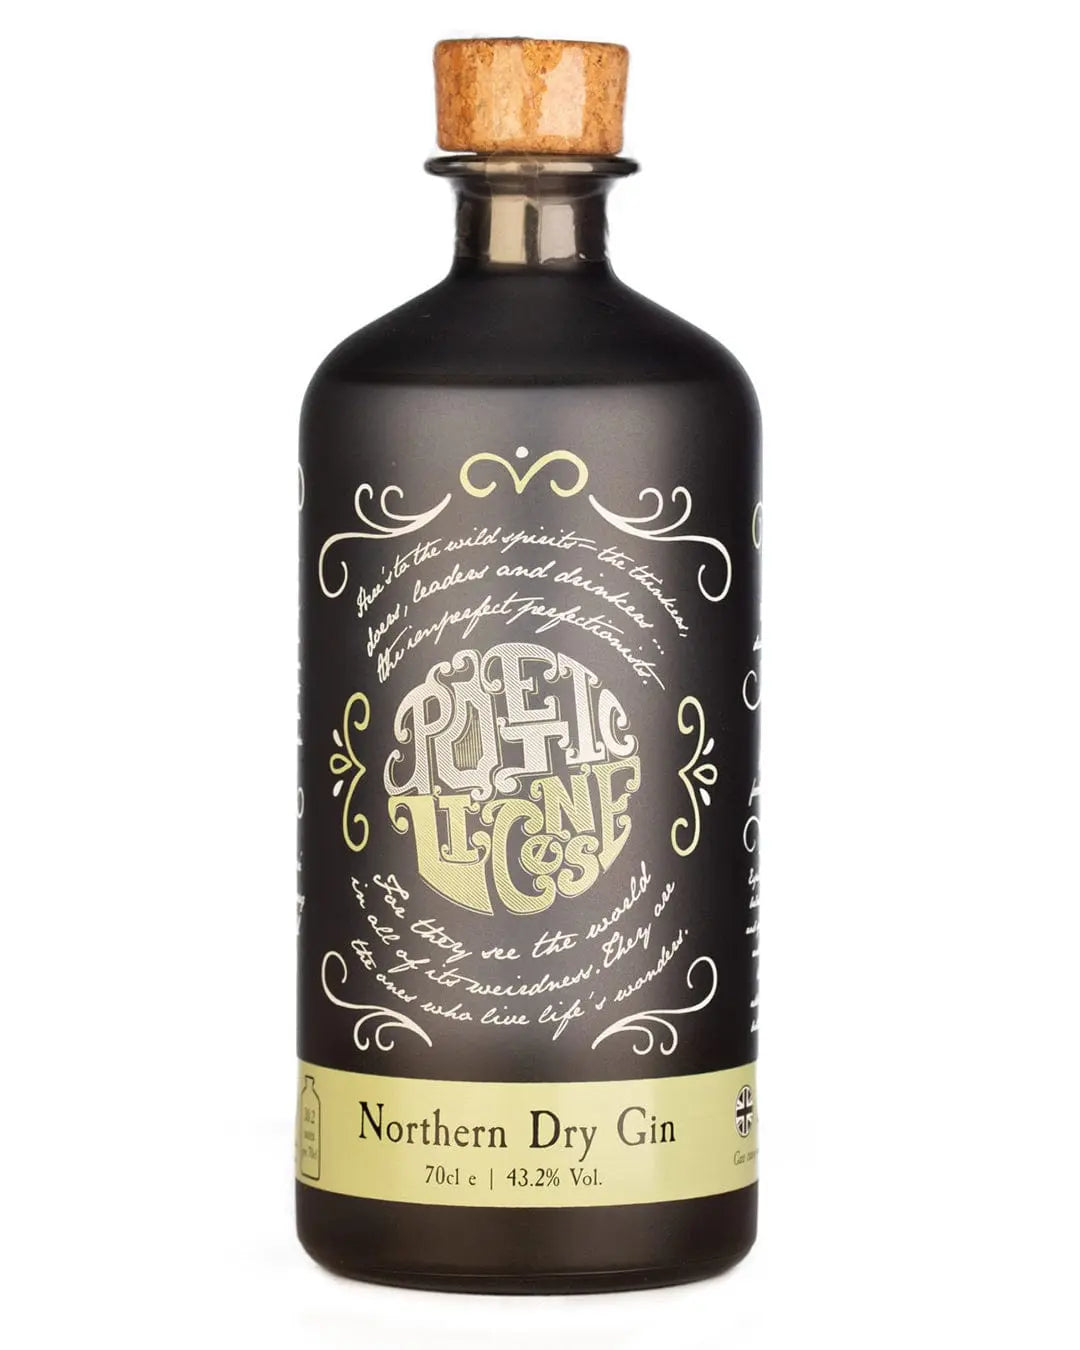 Poetic License Northern Dry Gin, 70 cl Gin